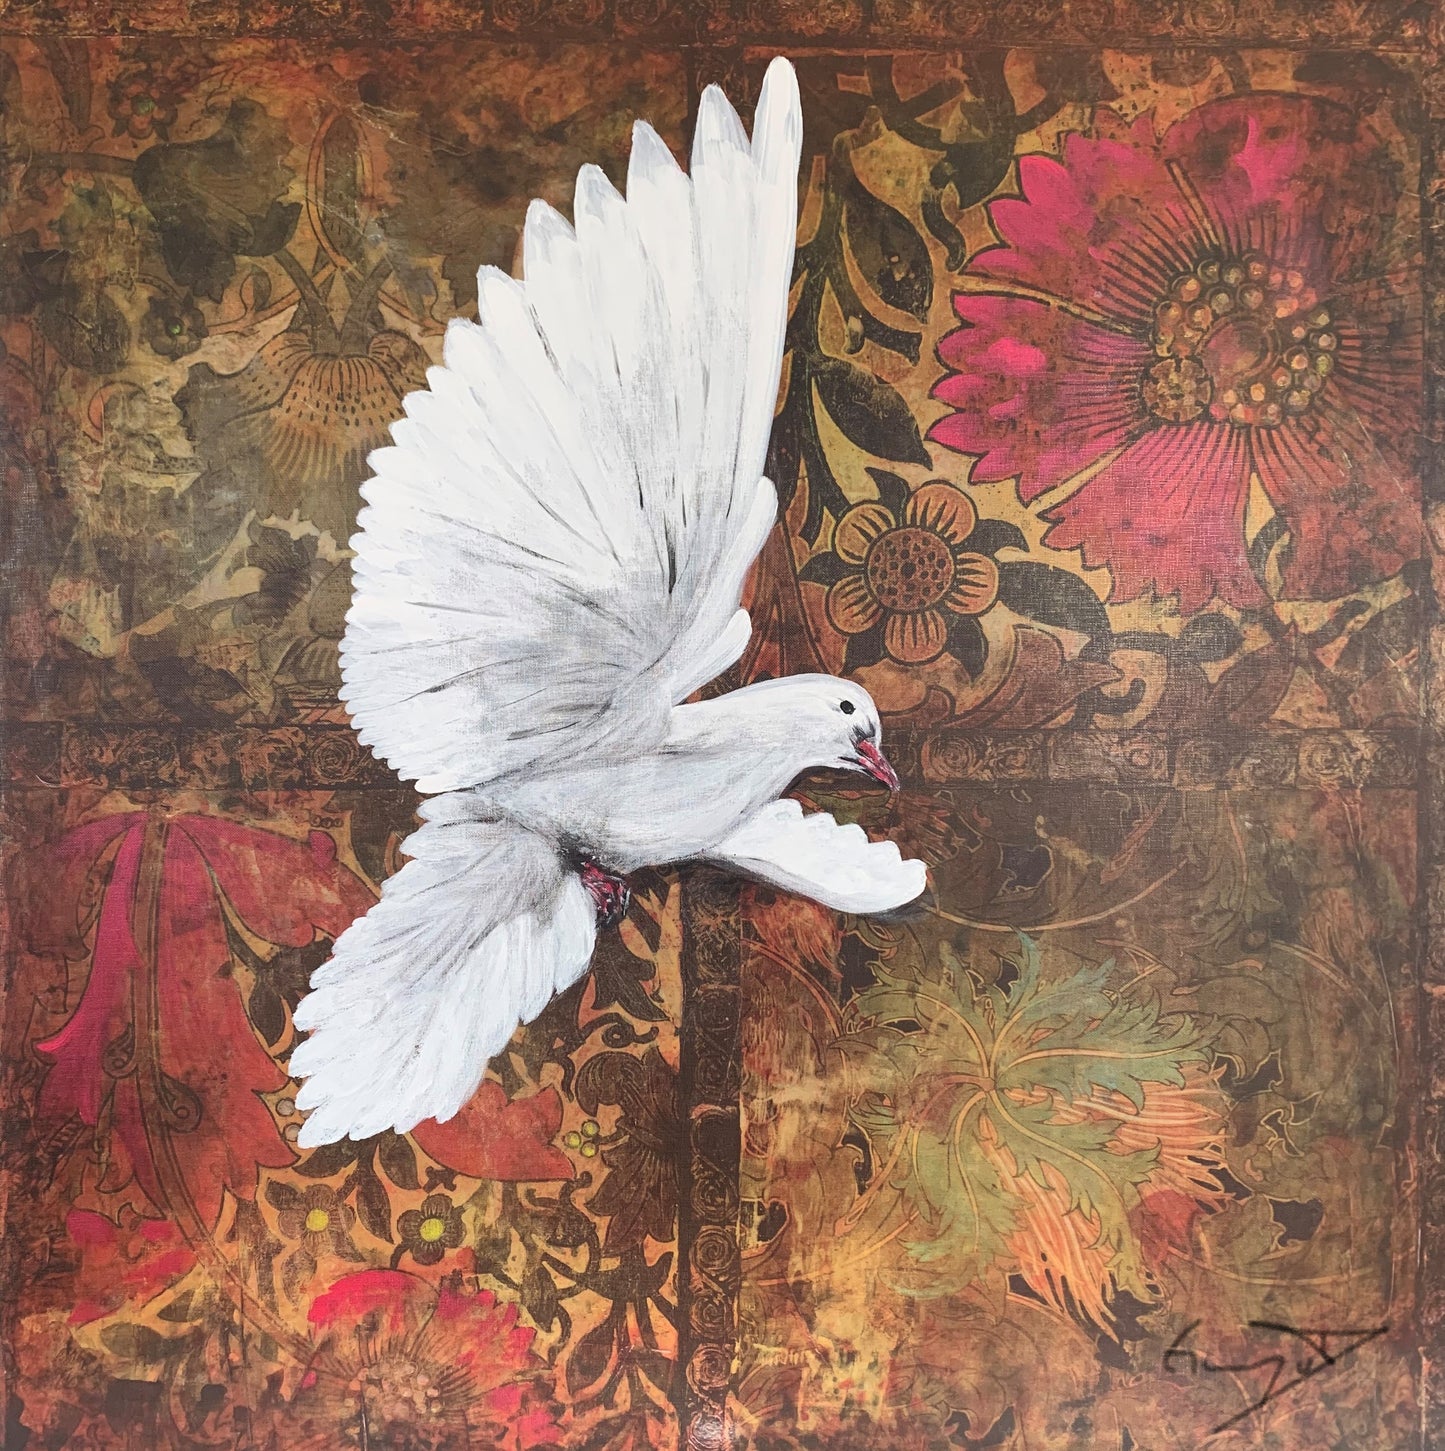 Cathedral Dove. Acrylic on printed canvas. 34.5 x 34.5 inches.